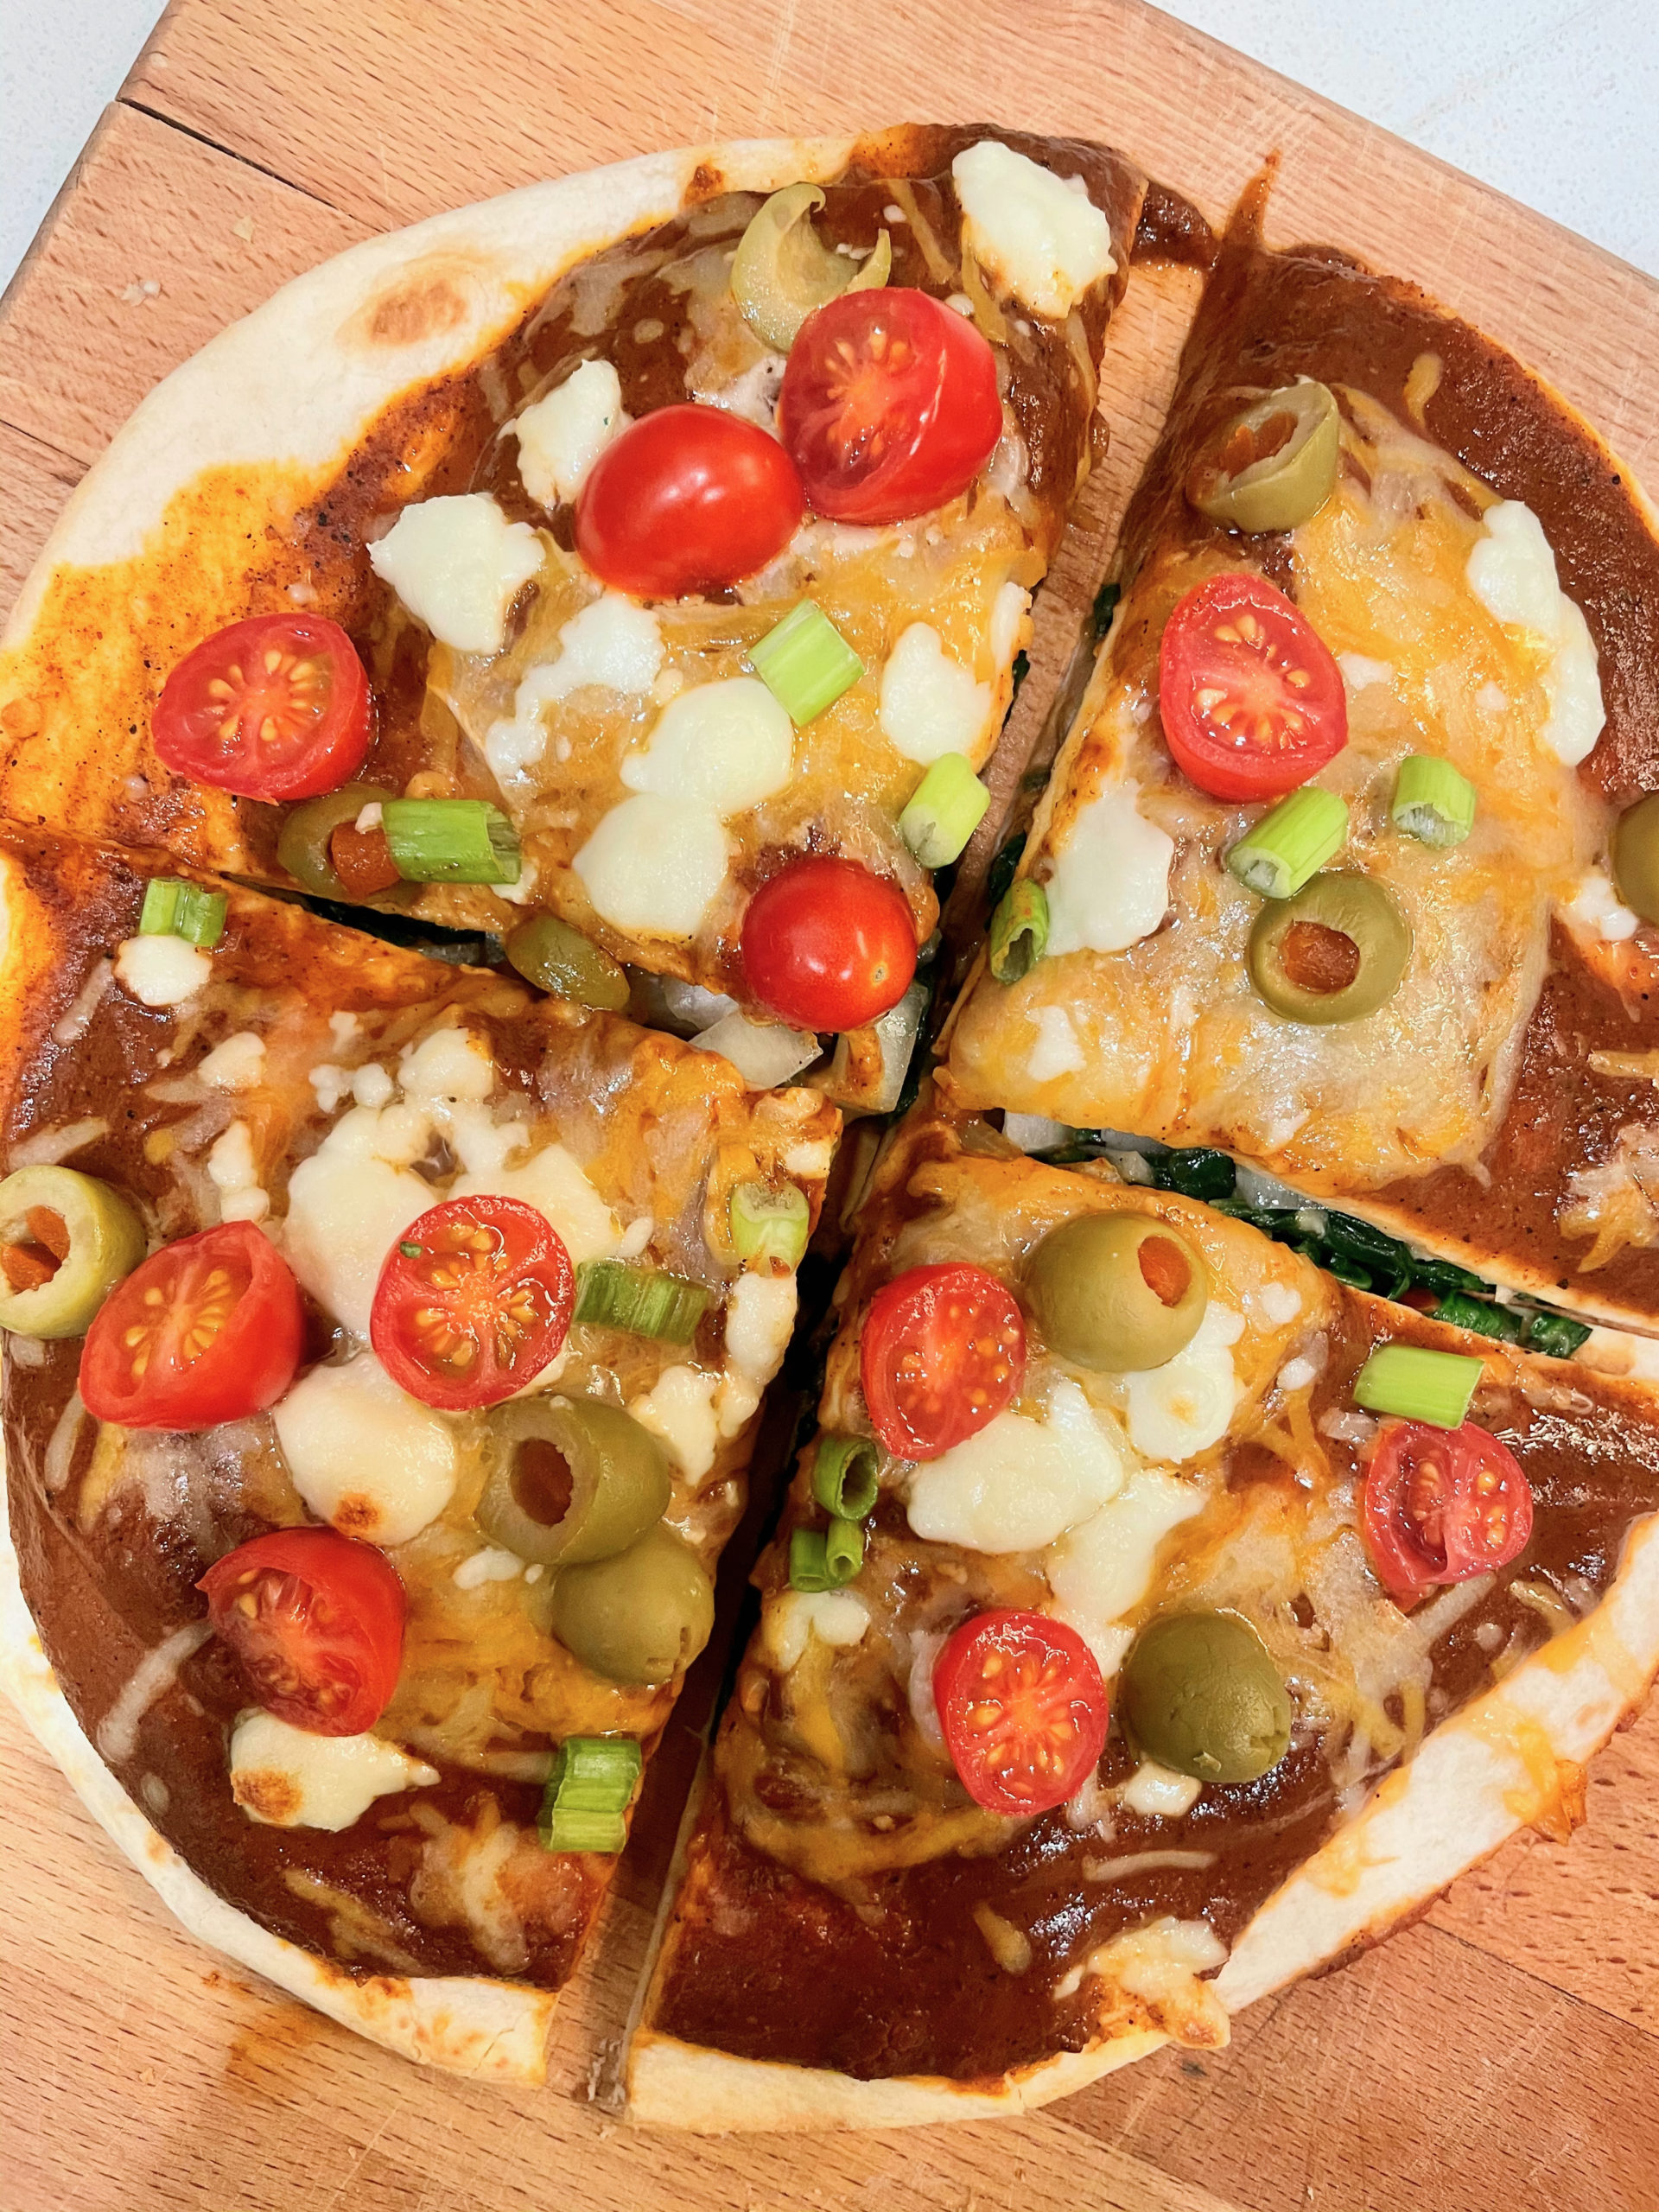 The Vegan Mexican Pizzas are ready!